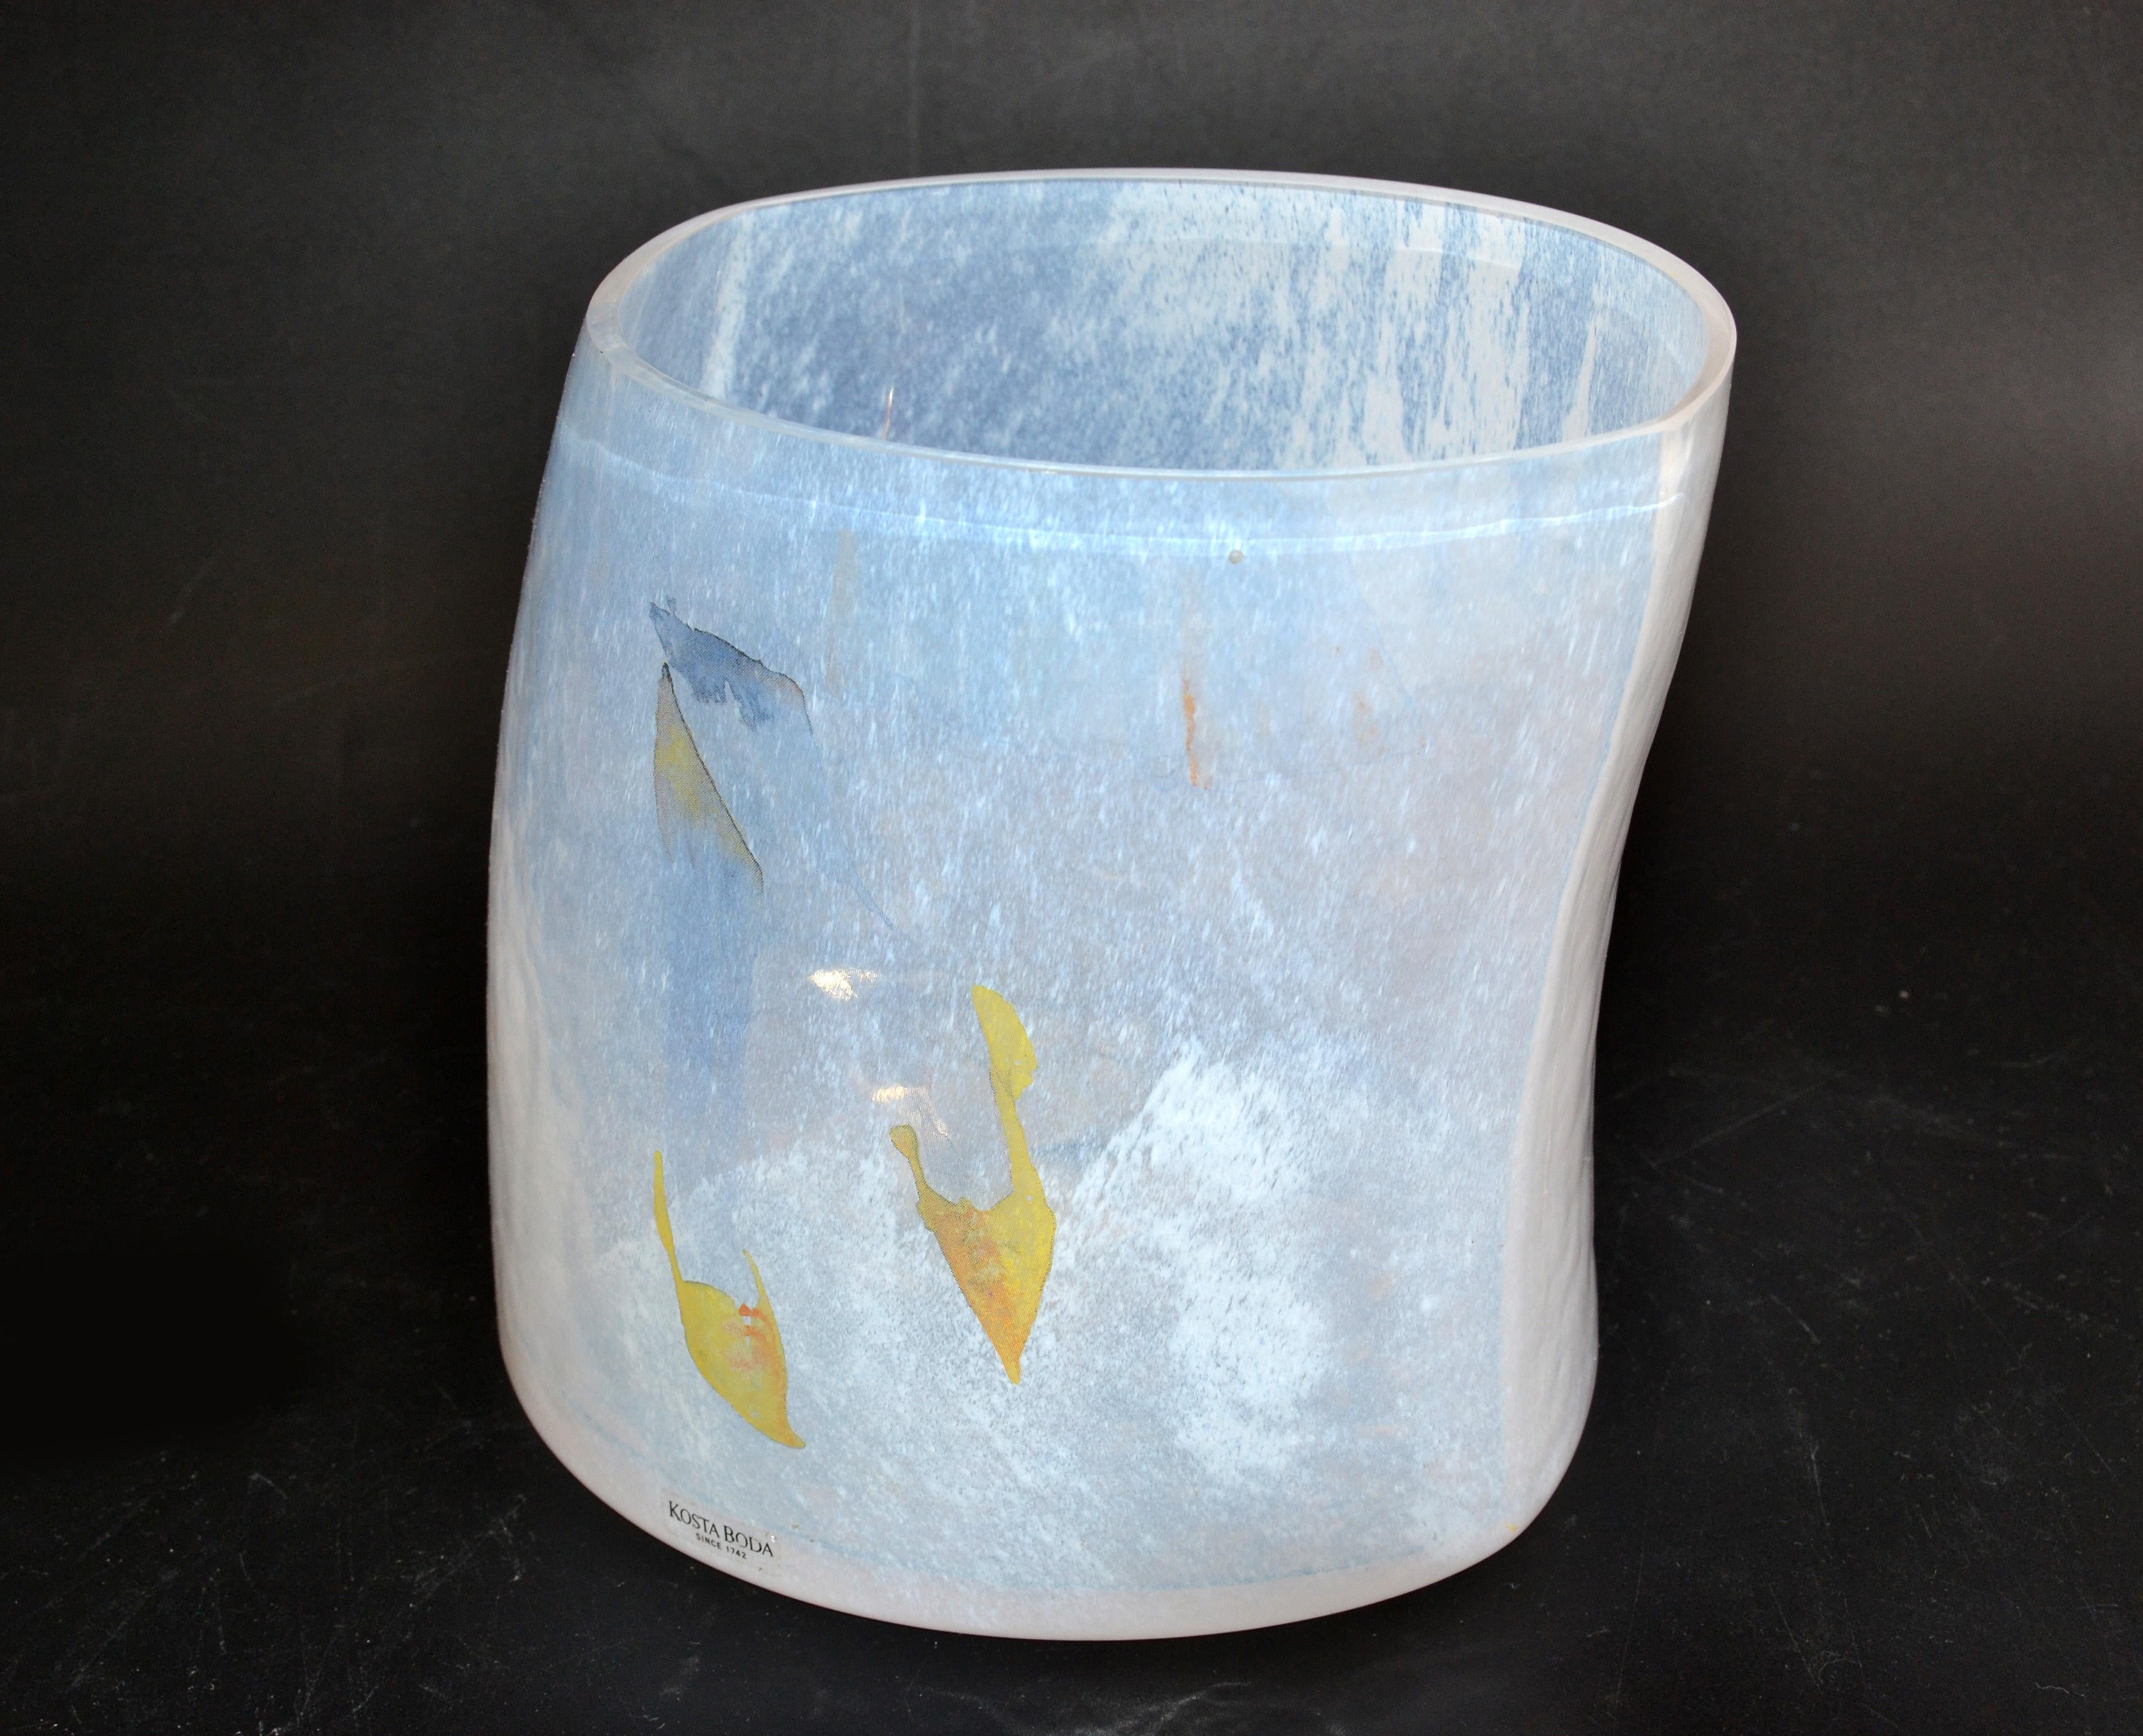 Mid-Century Modern catwalk frosted art glass vase designed by Kjell Engman for Kosta Boda made in Sweden.
Engraved at the bottom and numbered, 7048838.
The original label is placed at the upper rim from the outside.
  